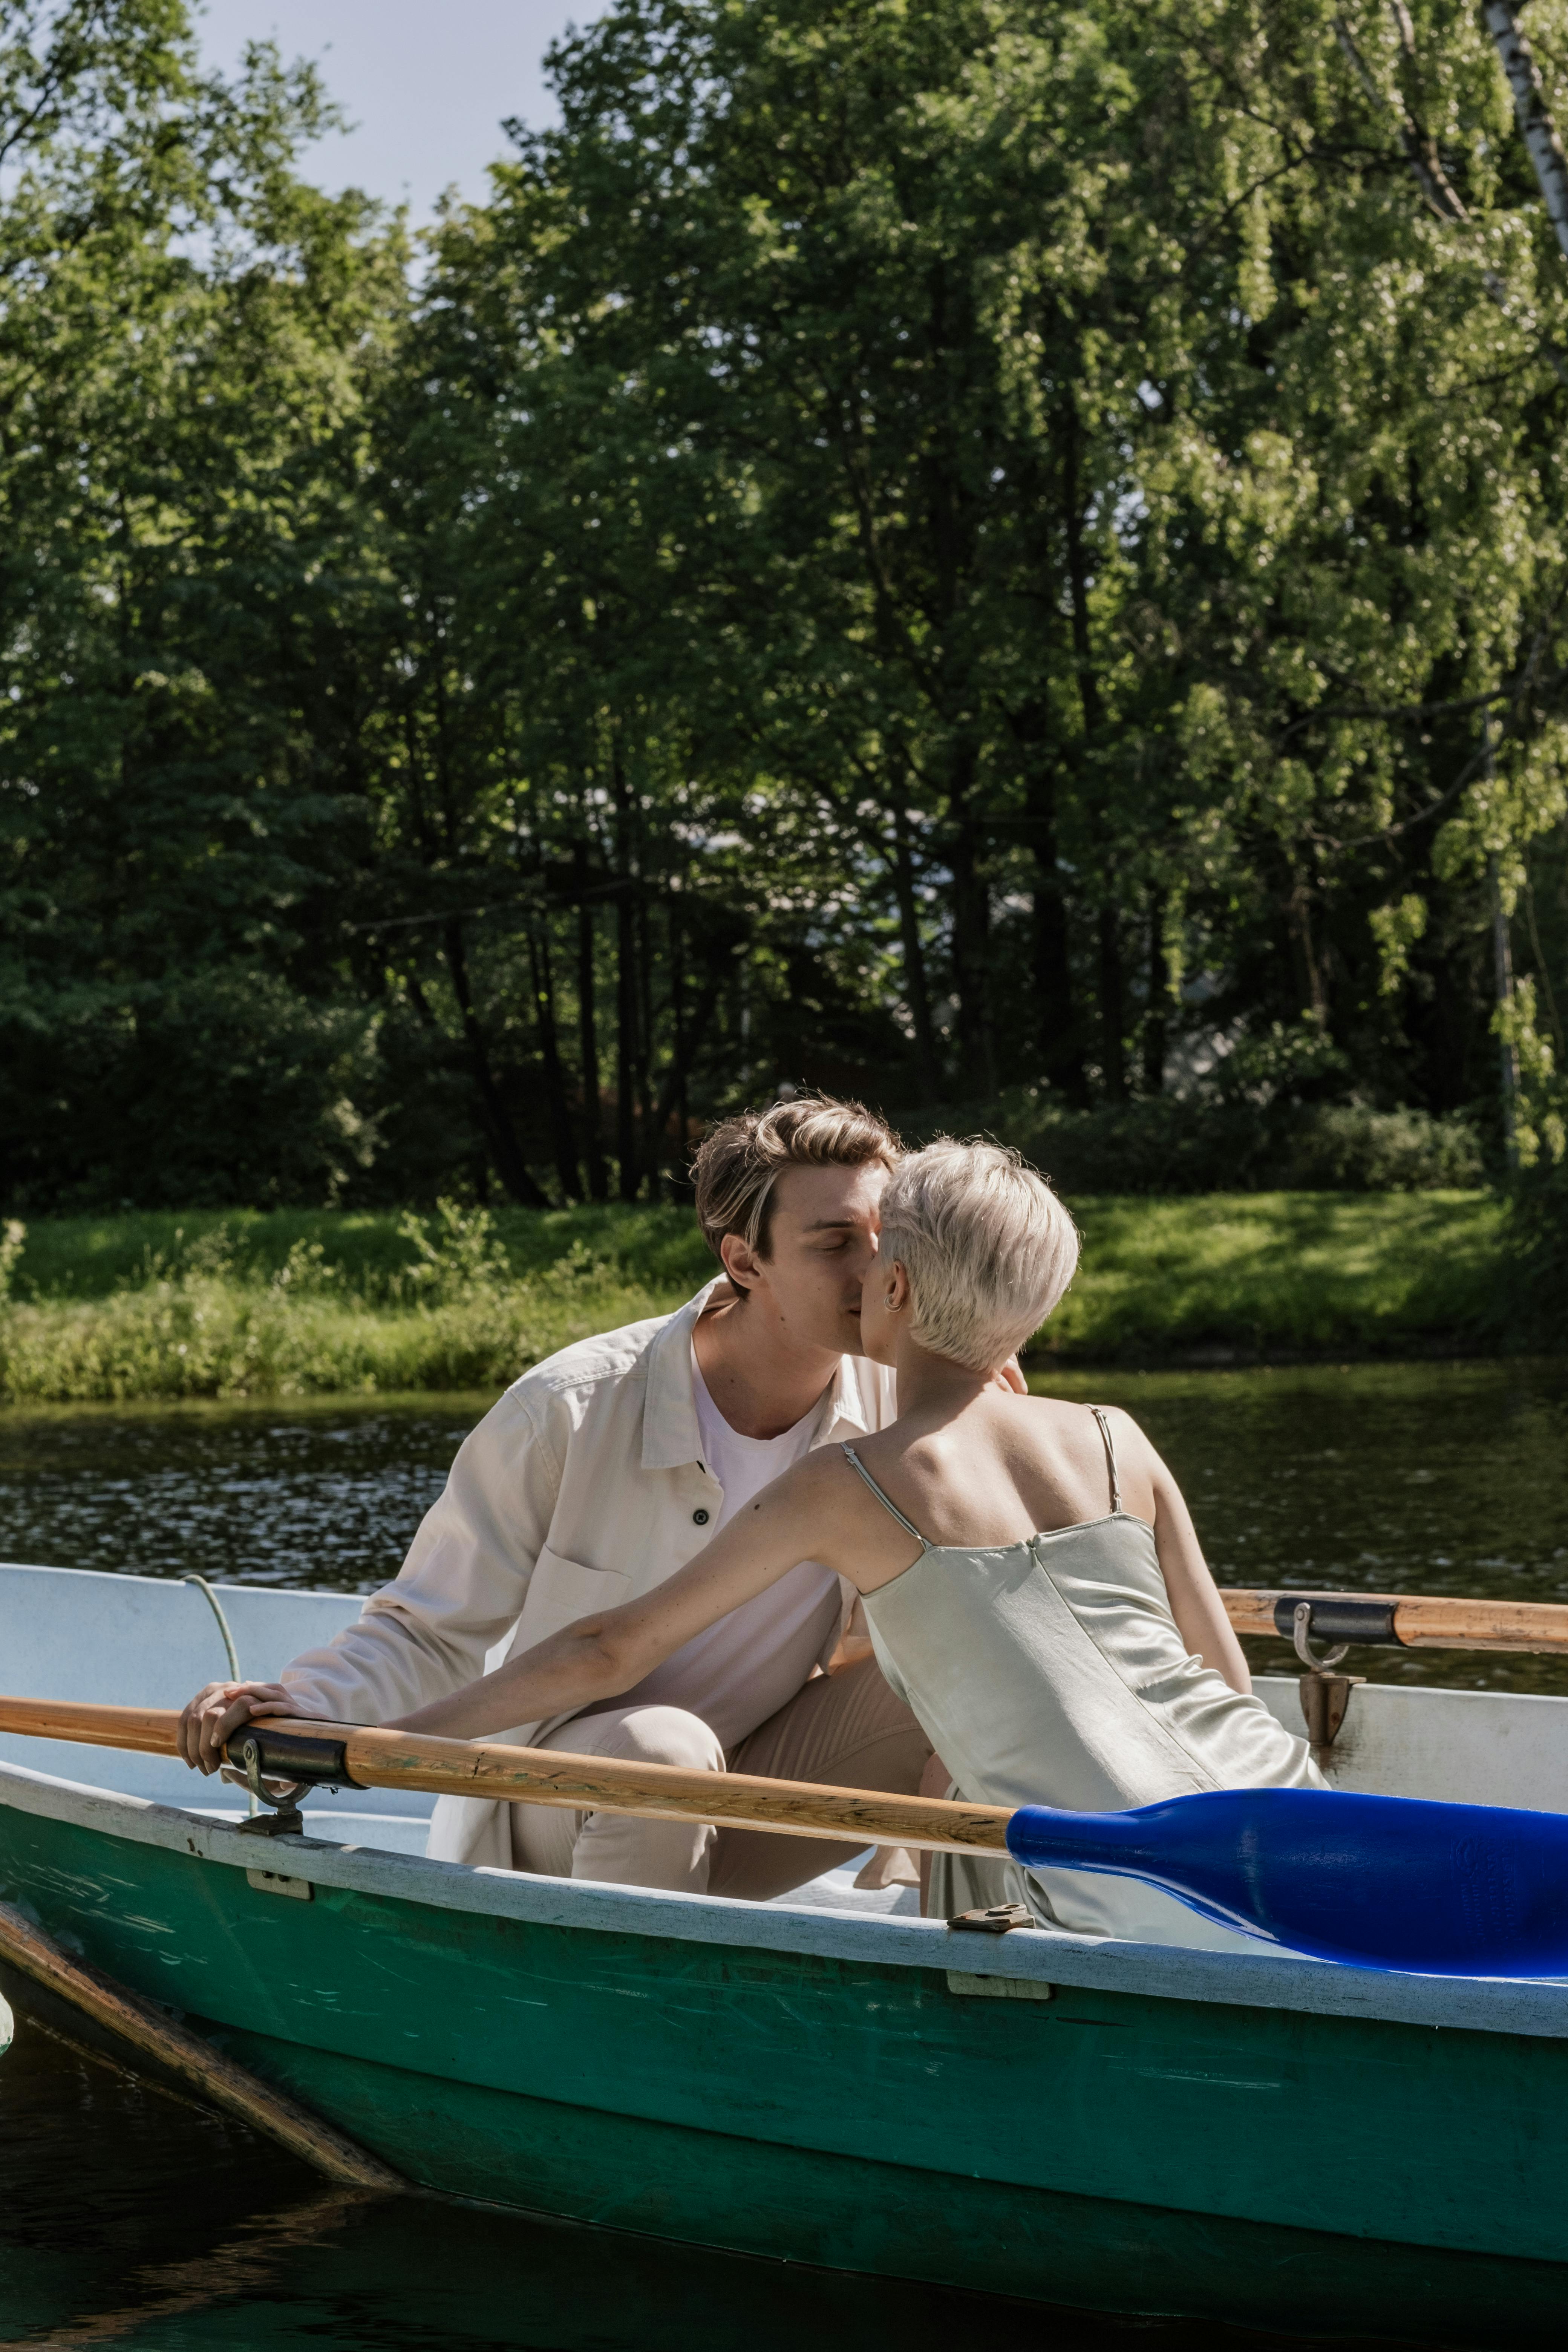 A couple sharing a kiss on a boat | Source: Pexels